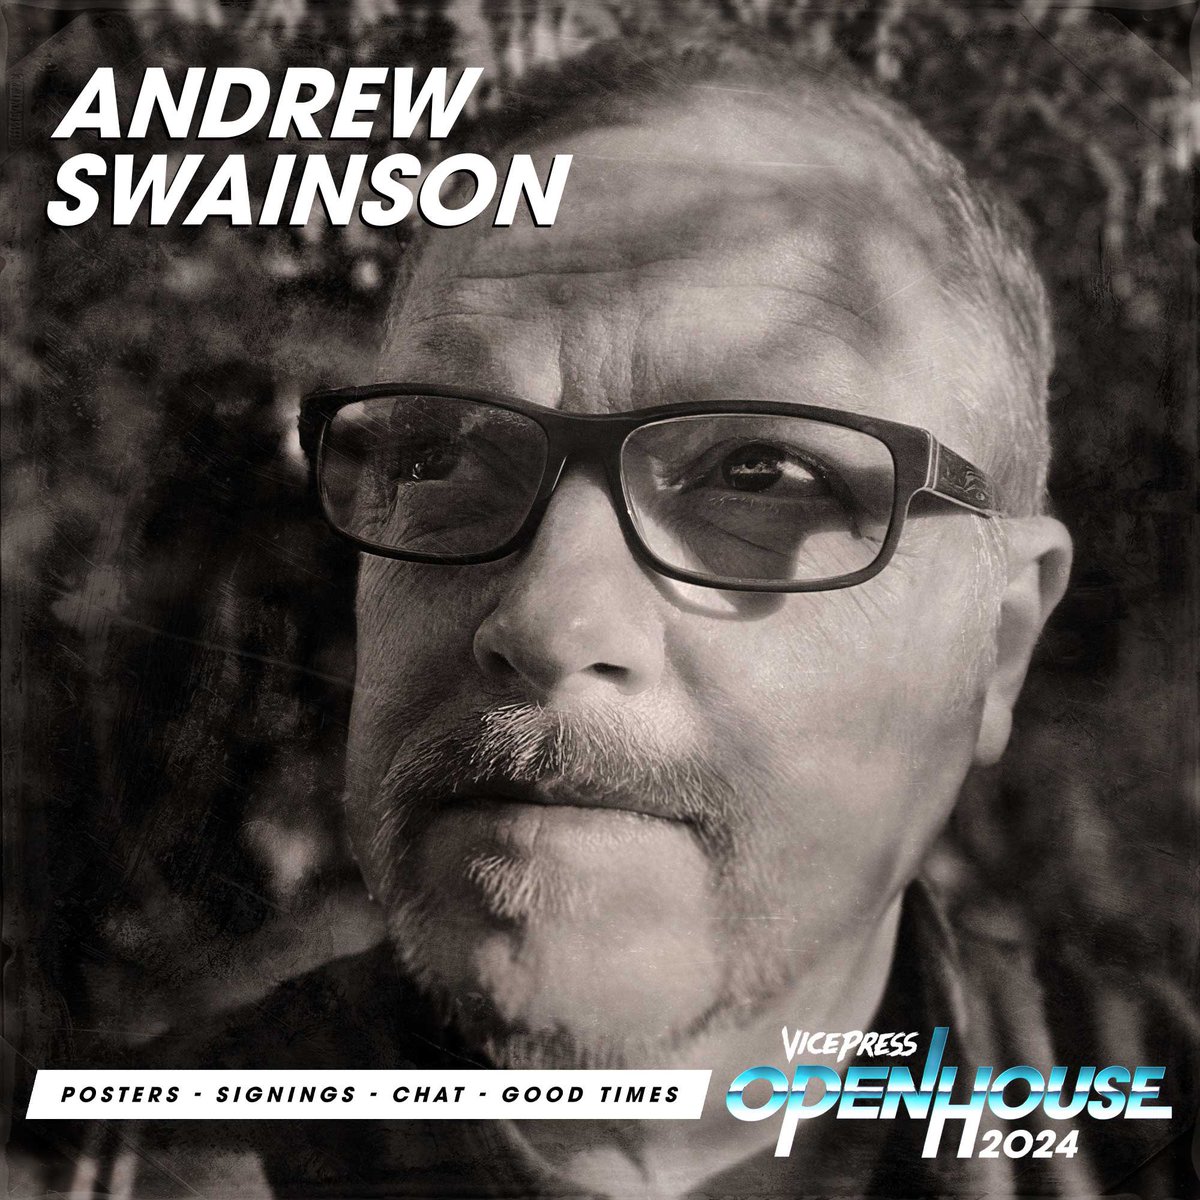 Open House is happening! Our very own convention. Loads of awesome artists in attendance, posters, chat and good times. Sheffield. June 8. Our friend & colleague Andrew Swainson will be there. Hopefully with some exclusive new art. Tickets and details - vicepressopenhouse.co.uk